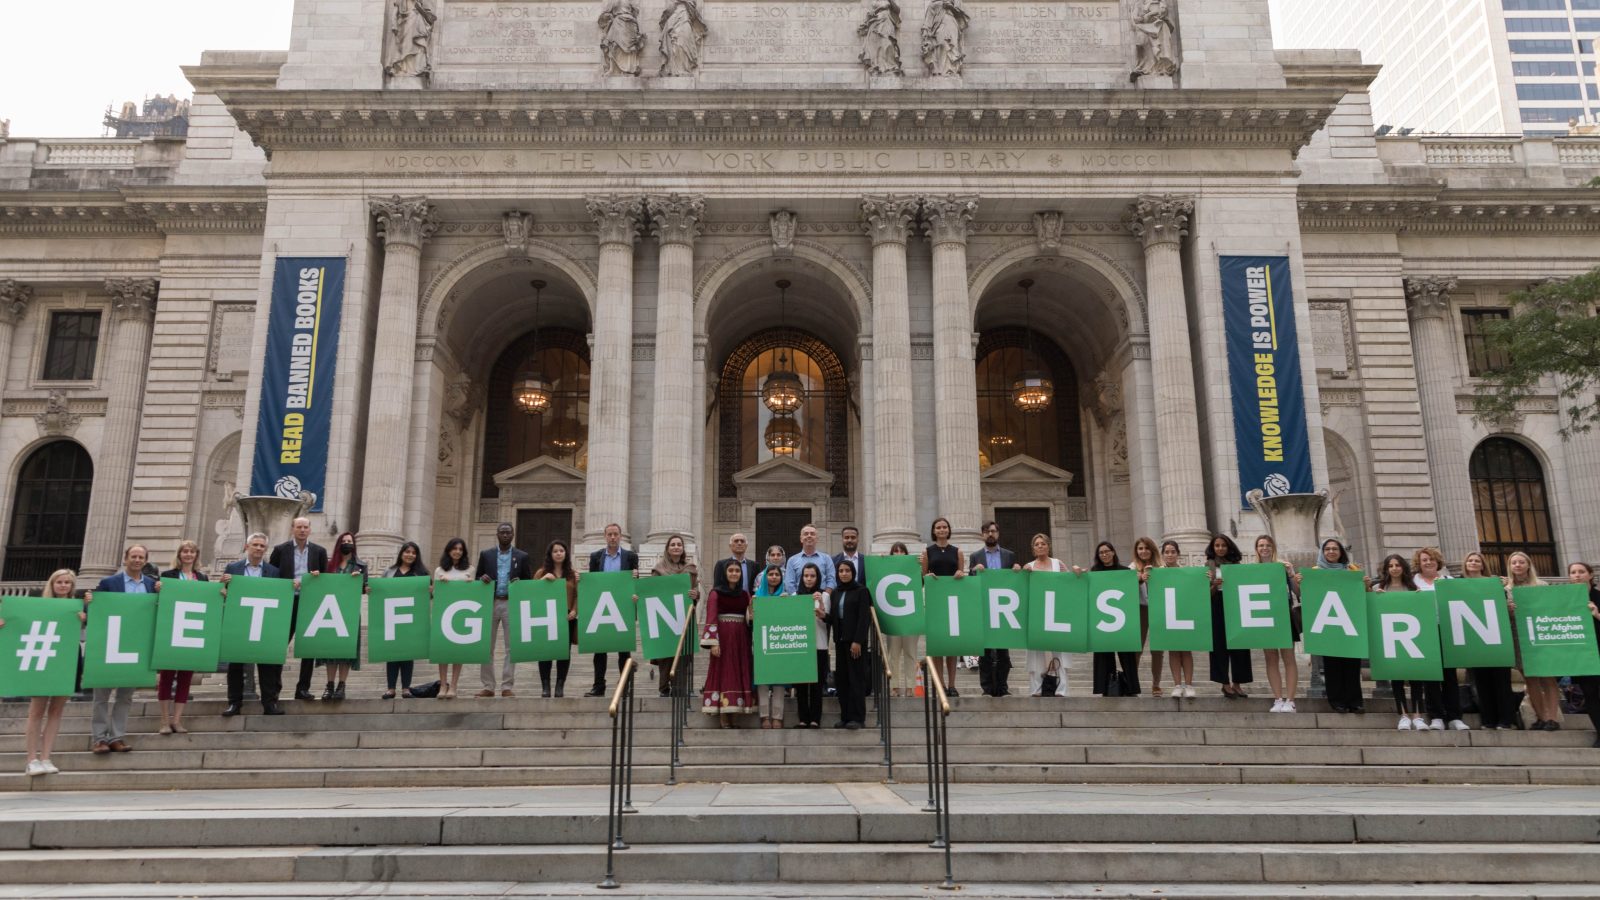 Women holding individual signs with green letters in front of an old building spelling out &quot;Let Afghan Girls Learn&quot;